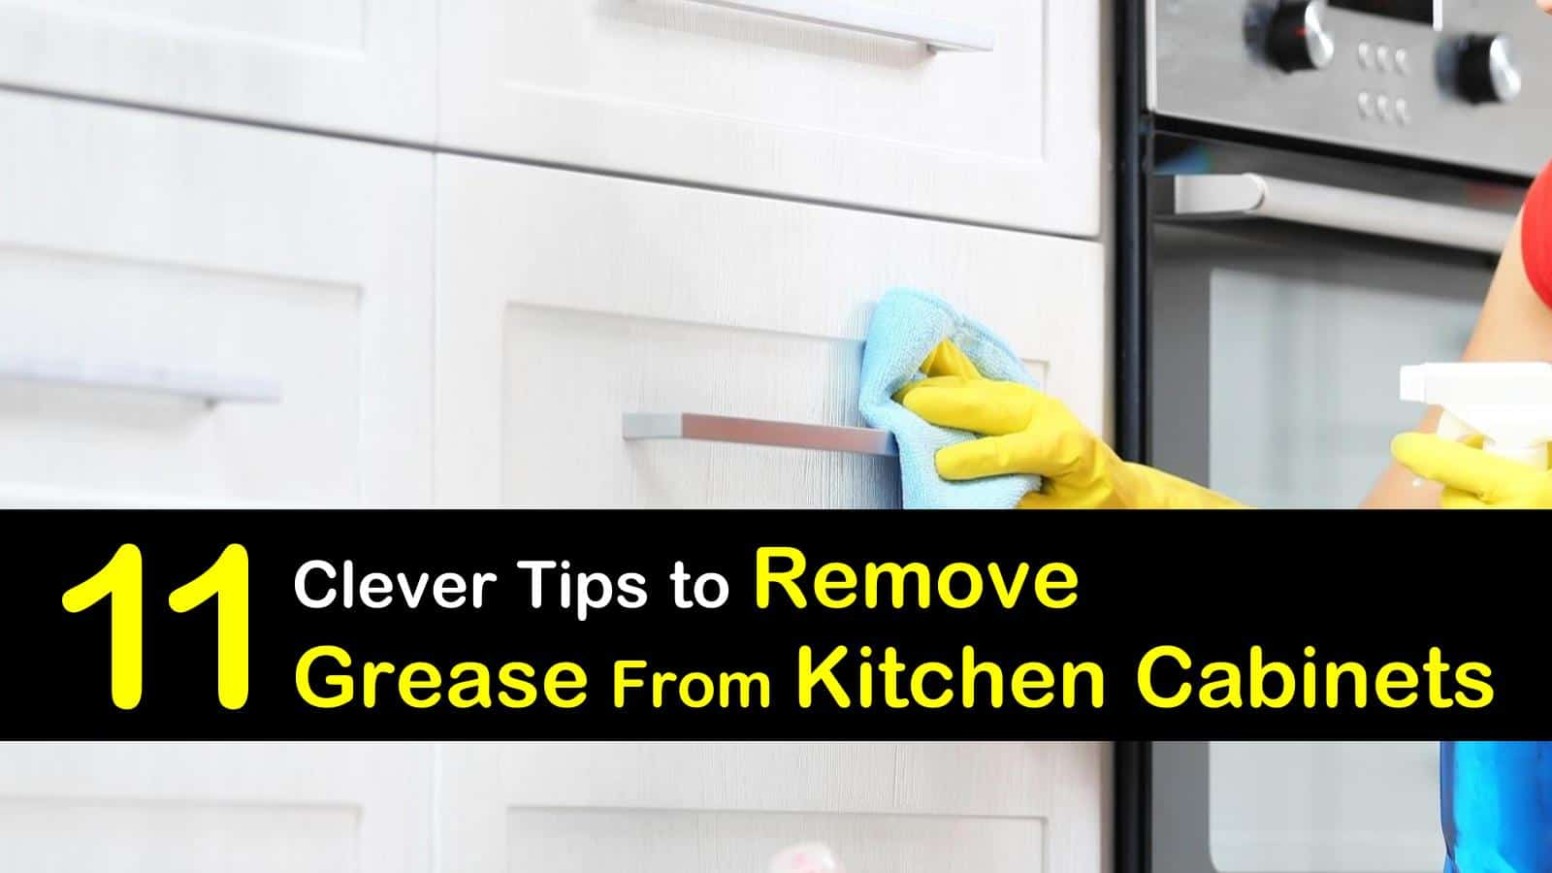 4 Clever Ways to Remove Grease from Kitchen Cabinets - how do you get grease off white cabinets?